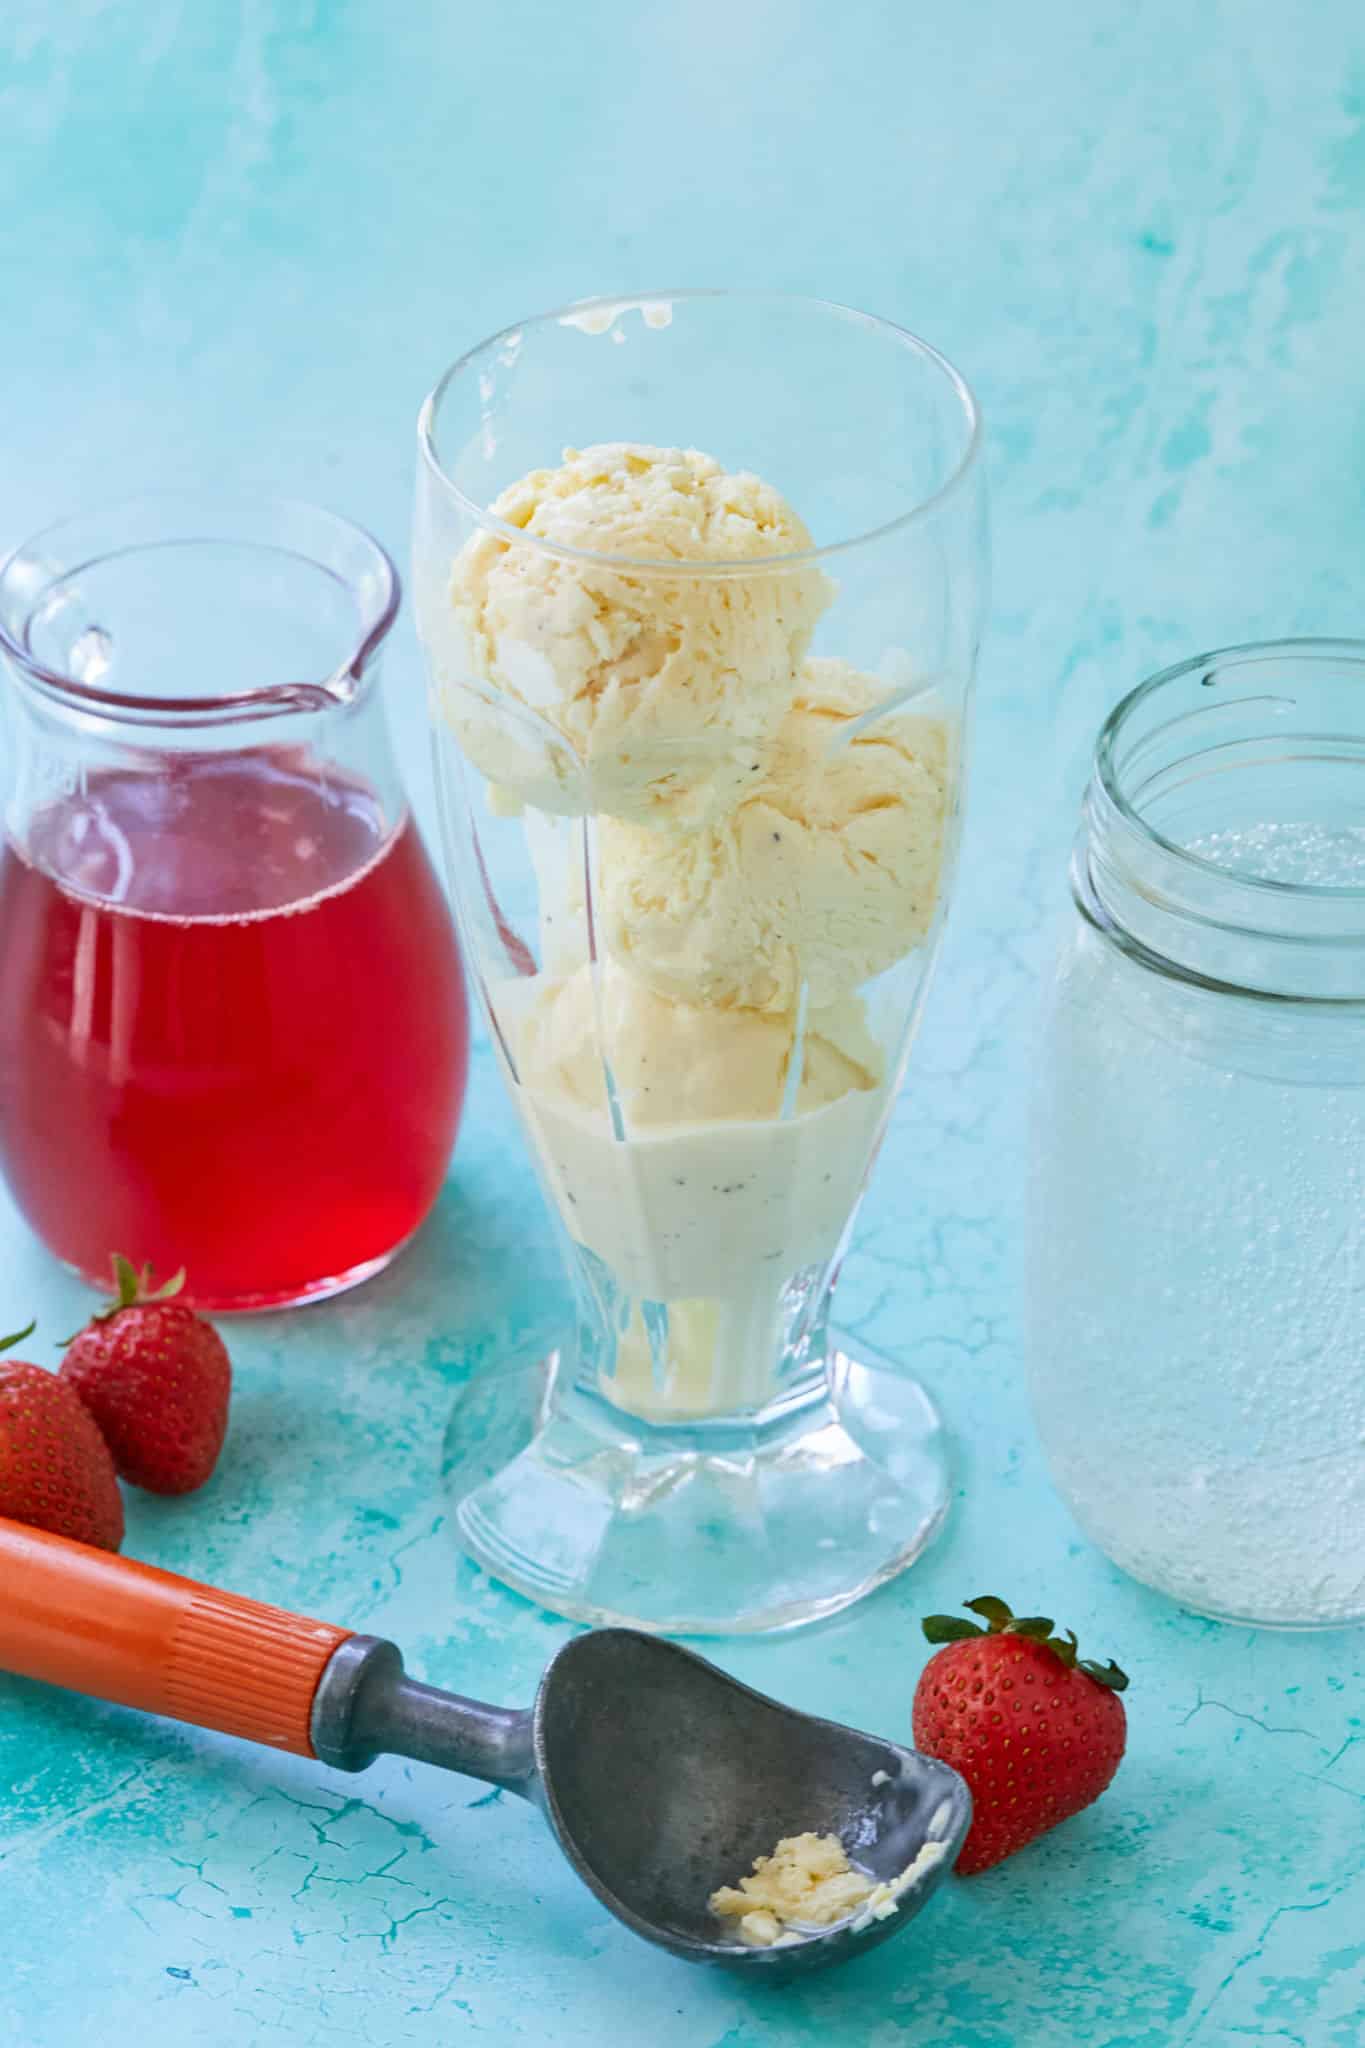 Ice cream in a glass next to strawberry syrup